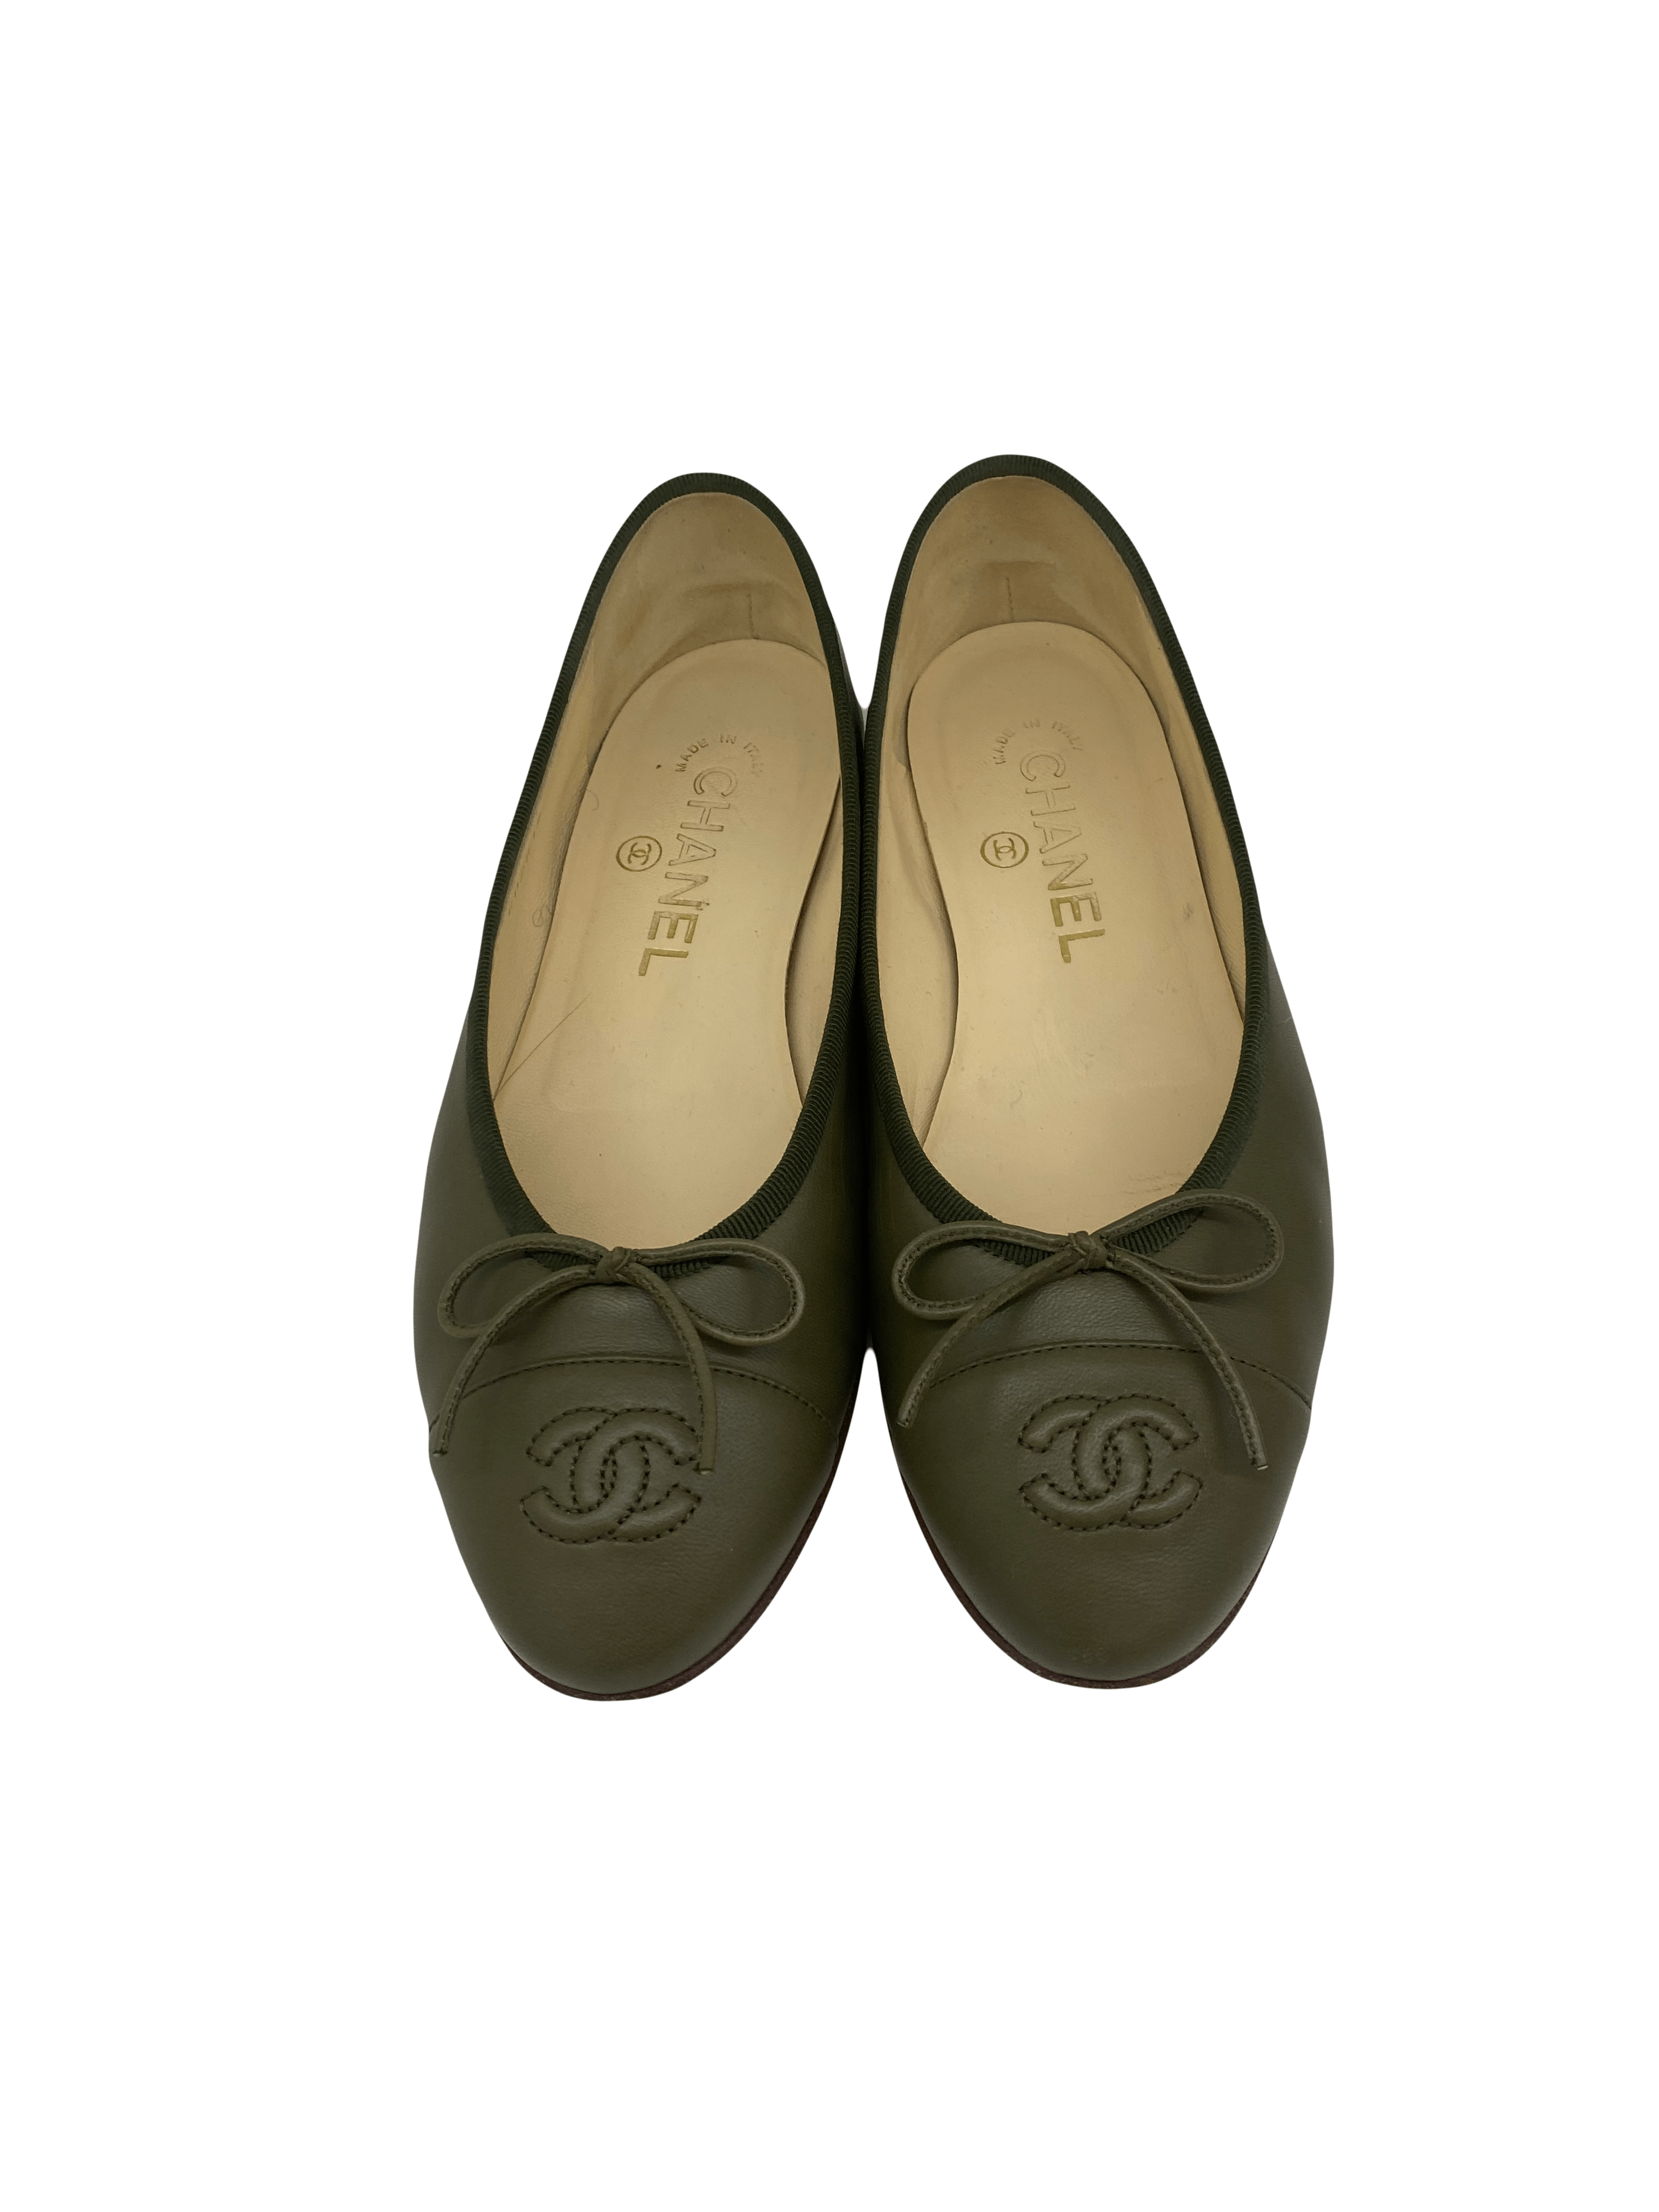 Ballet flats Chanel Gold size 36.5 EU in Plastic - 35193856